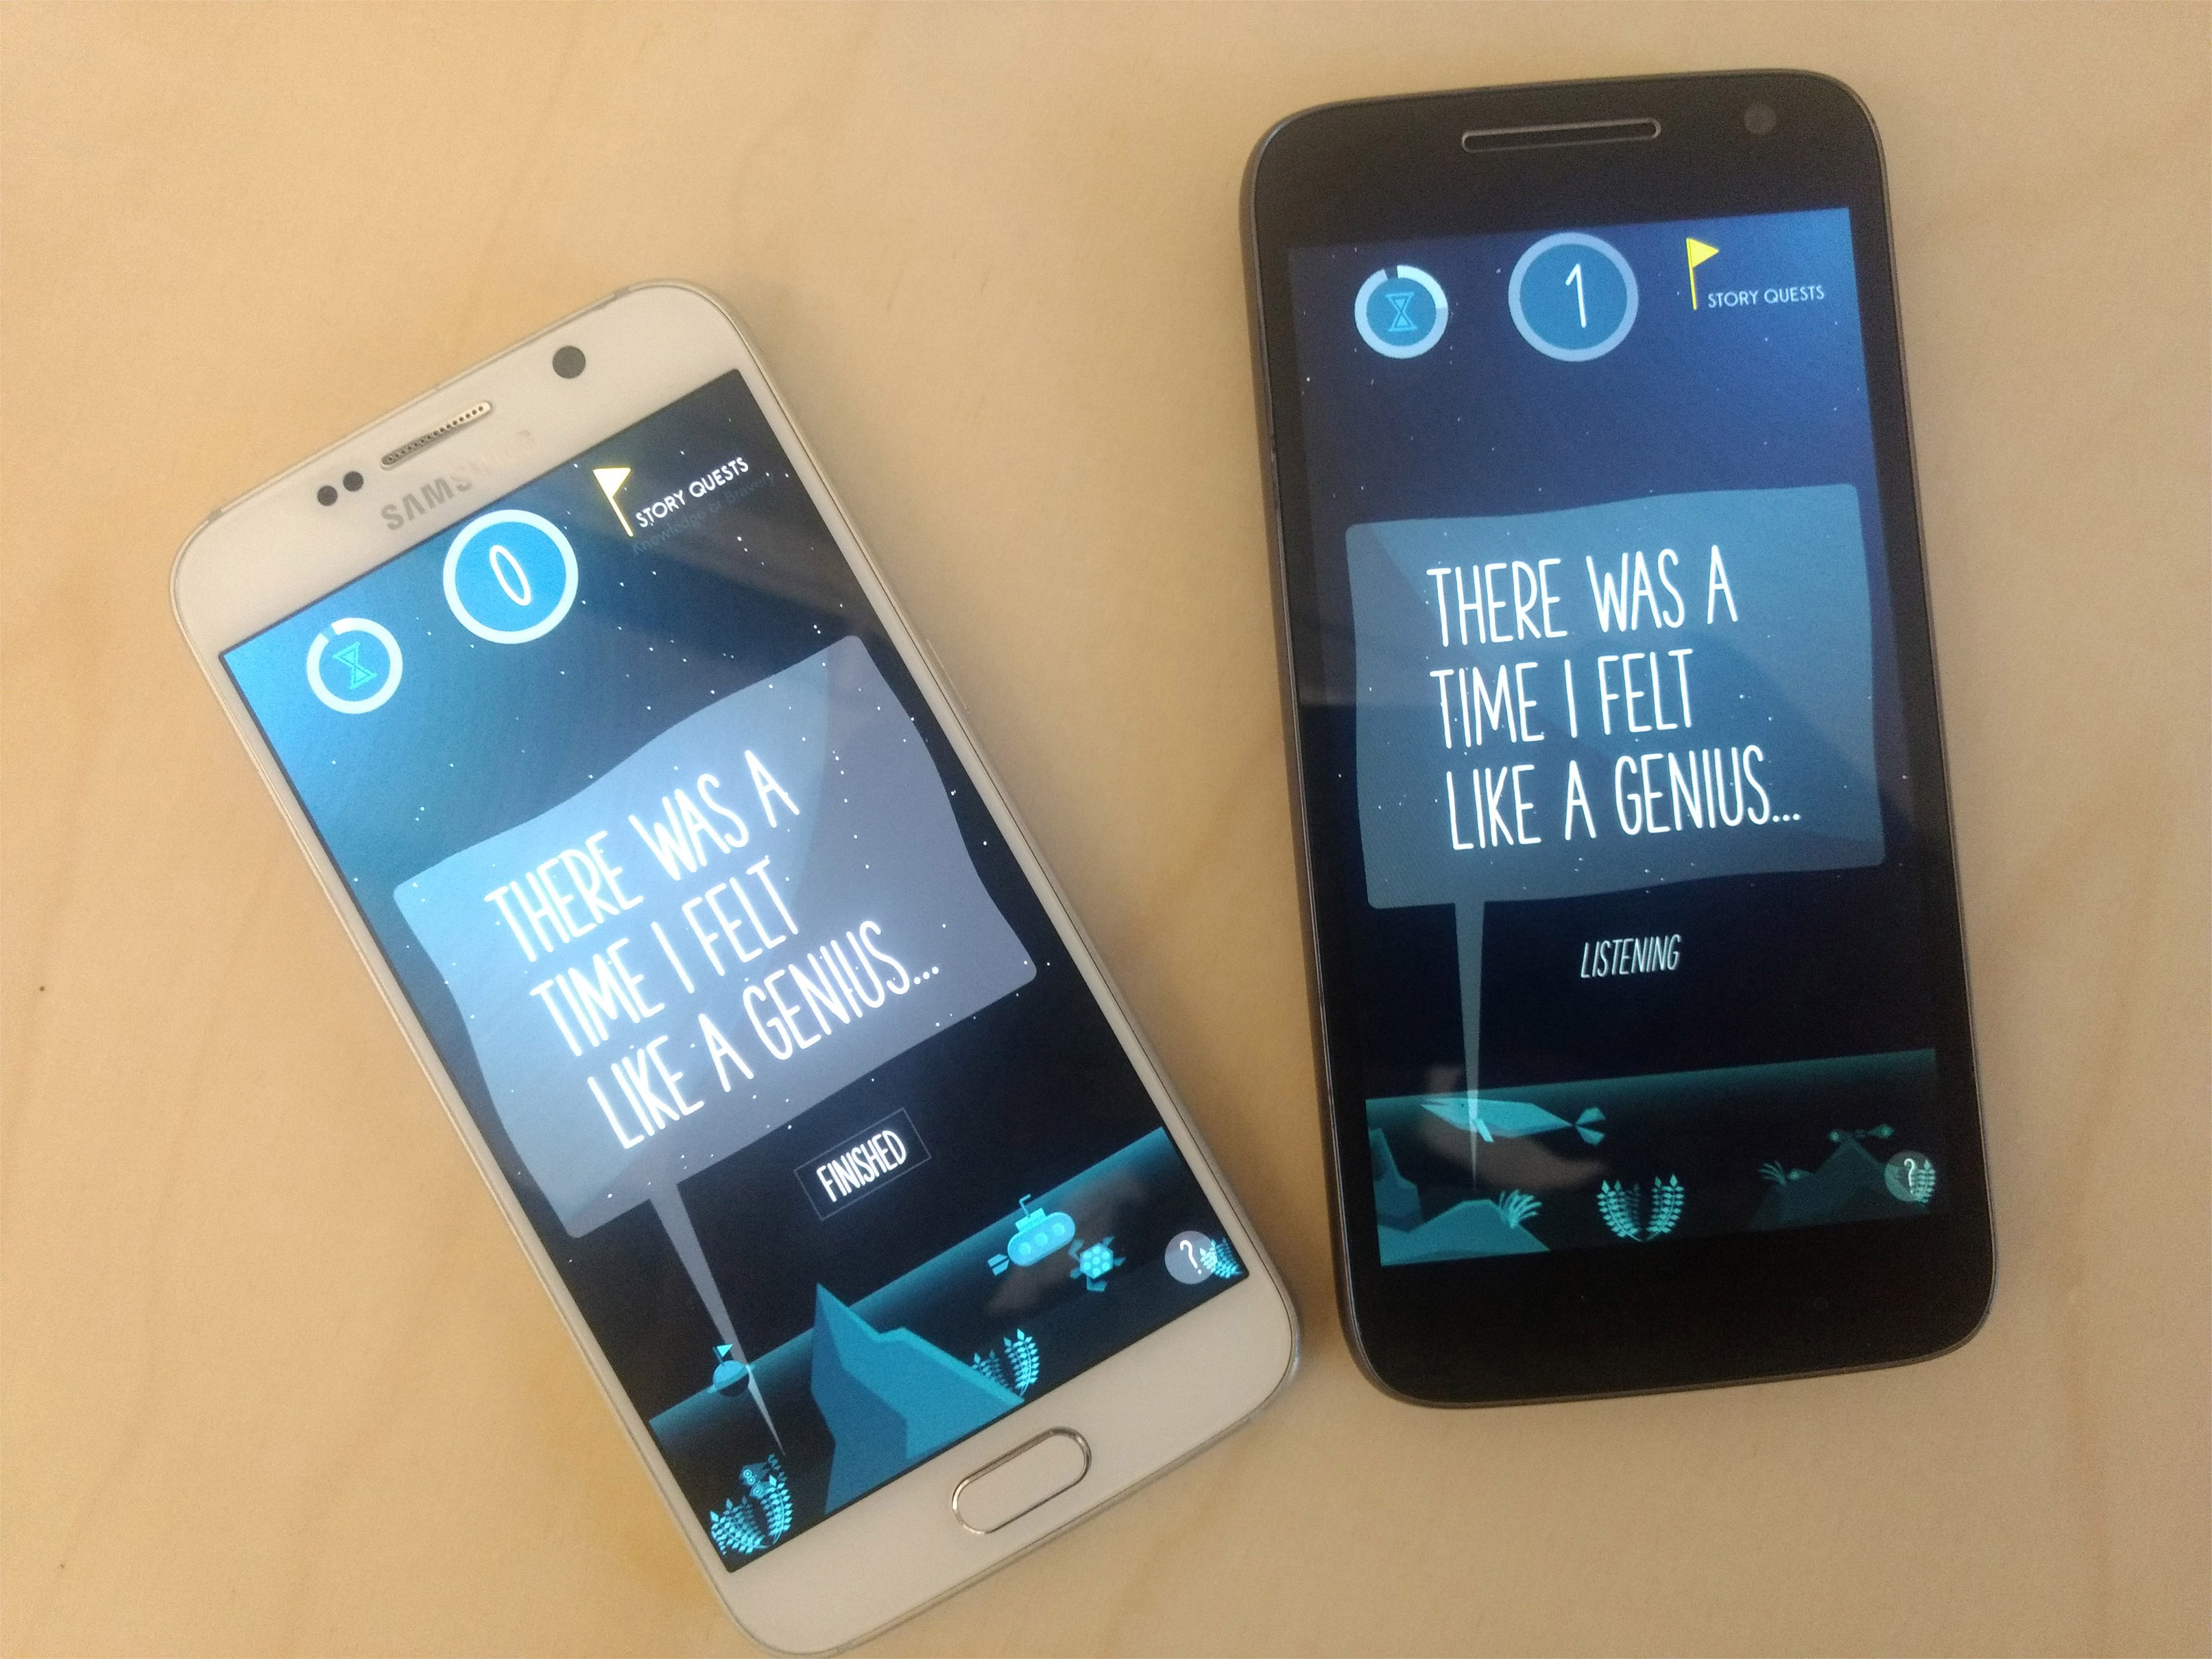 View full size version of two Android smartphones with a game screen open